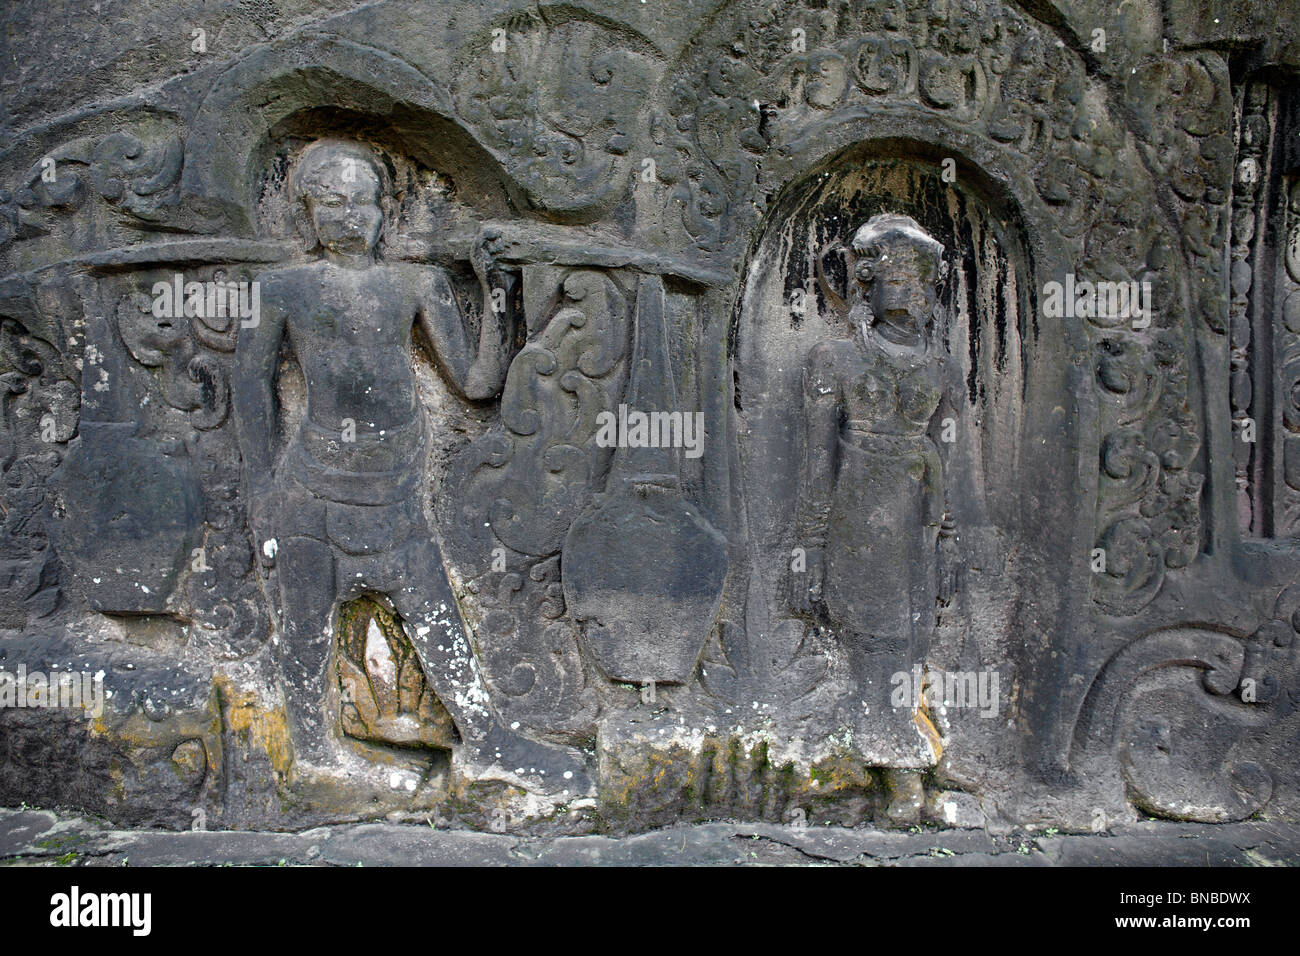 Yeh Pulu relief is an ancient complex of rock carvings at Bedulu, near Ubud, Bali. Stock Photo